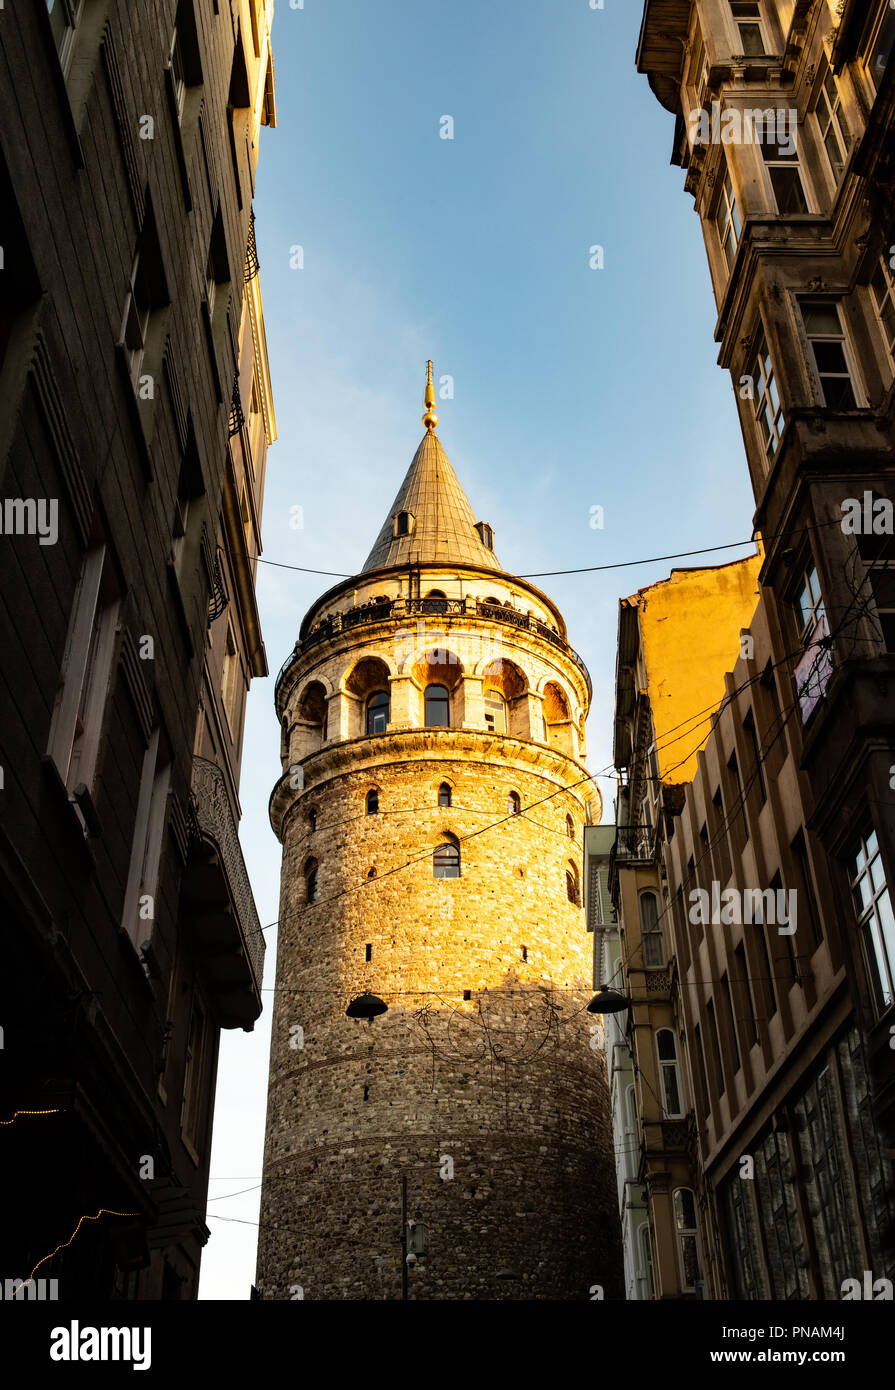 Galata Tower in Old Town of Istanbul, Turkey Stock Photo